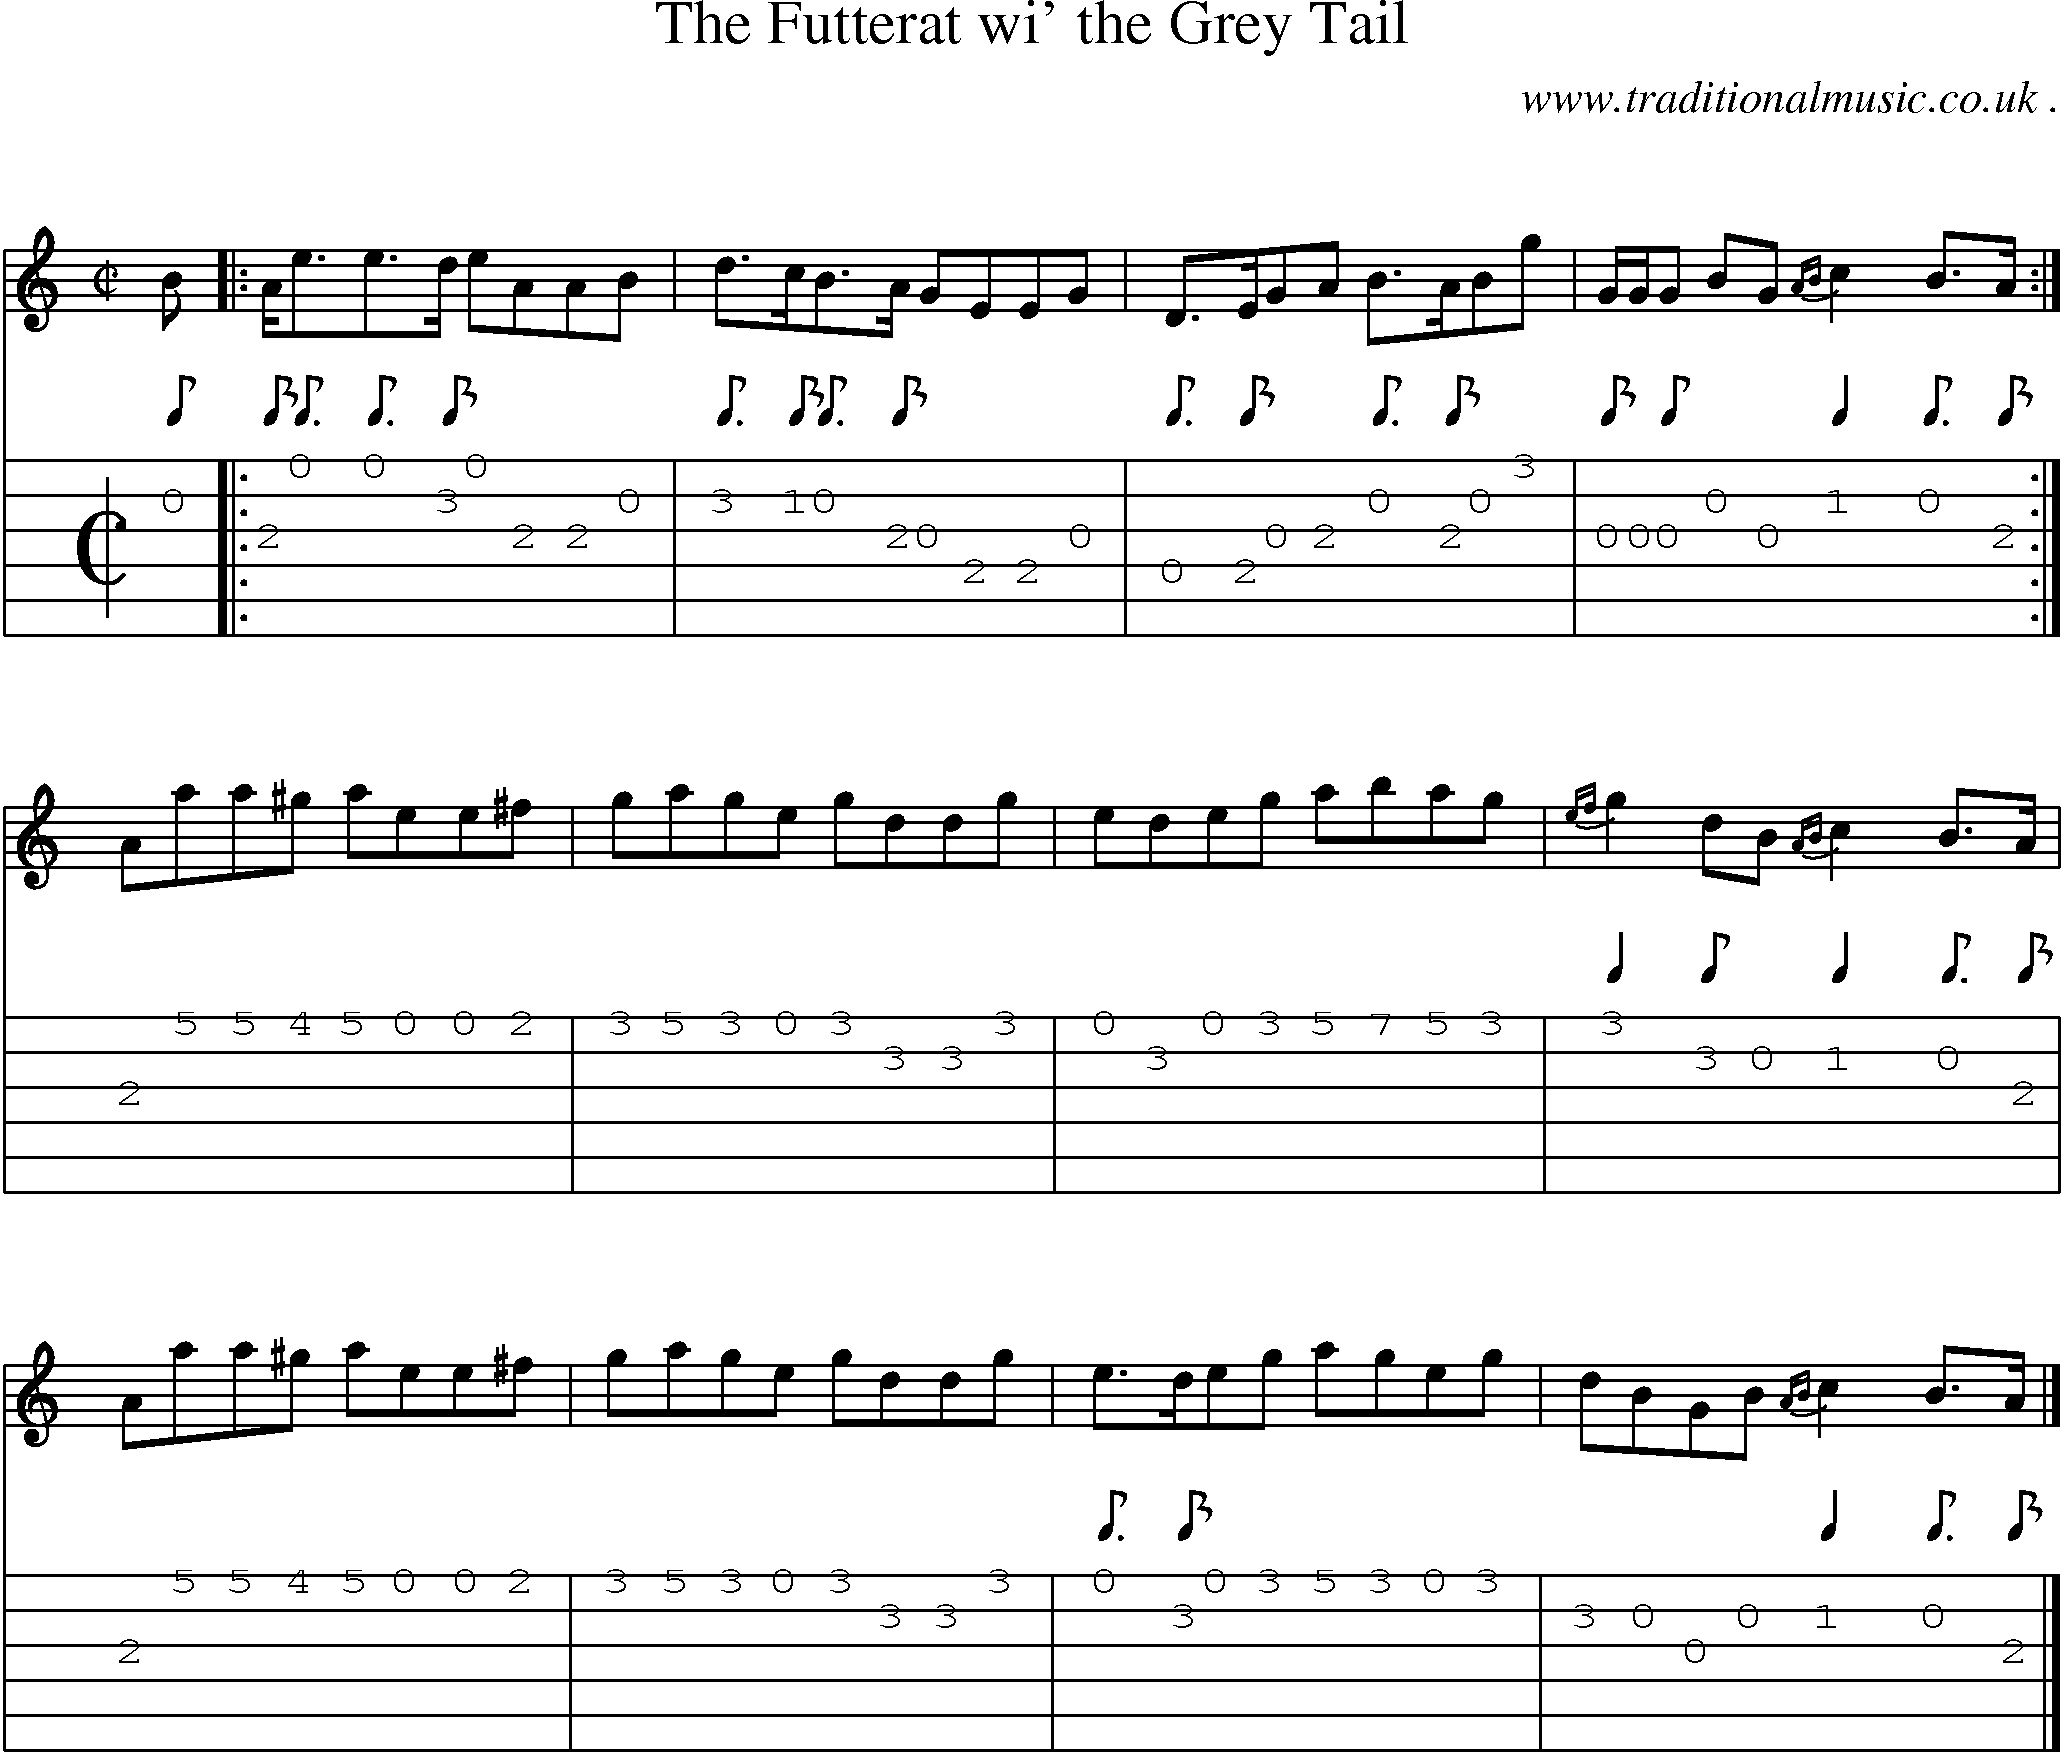 Sheet-music  score, Chords and Guitar Tabs for The Futterat Wi The Grey Tail